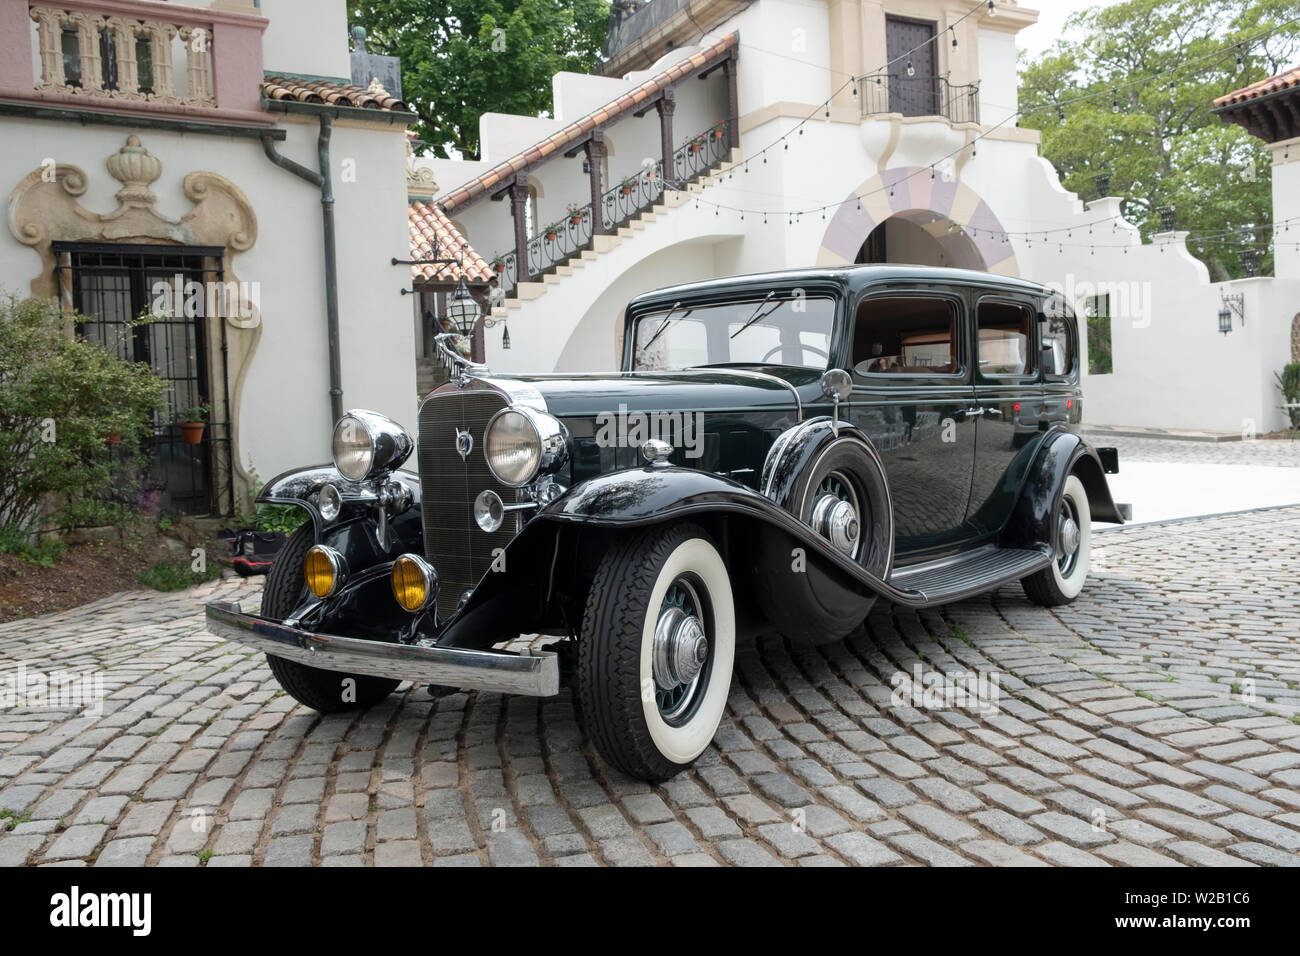 A 1932 Cadillac parked in the courtyard of the Vanderbilt Mansion in Centerport, Long Island, New York Stock Photo